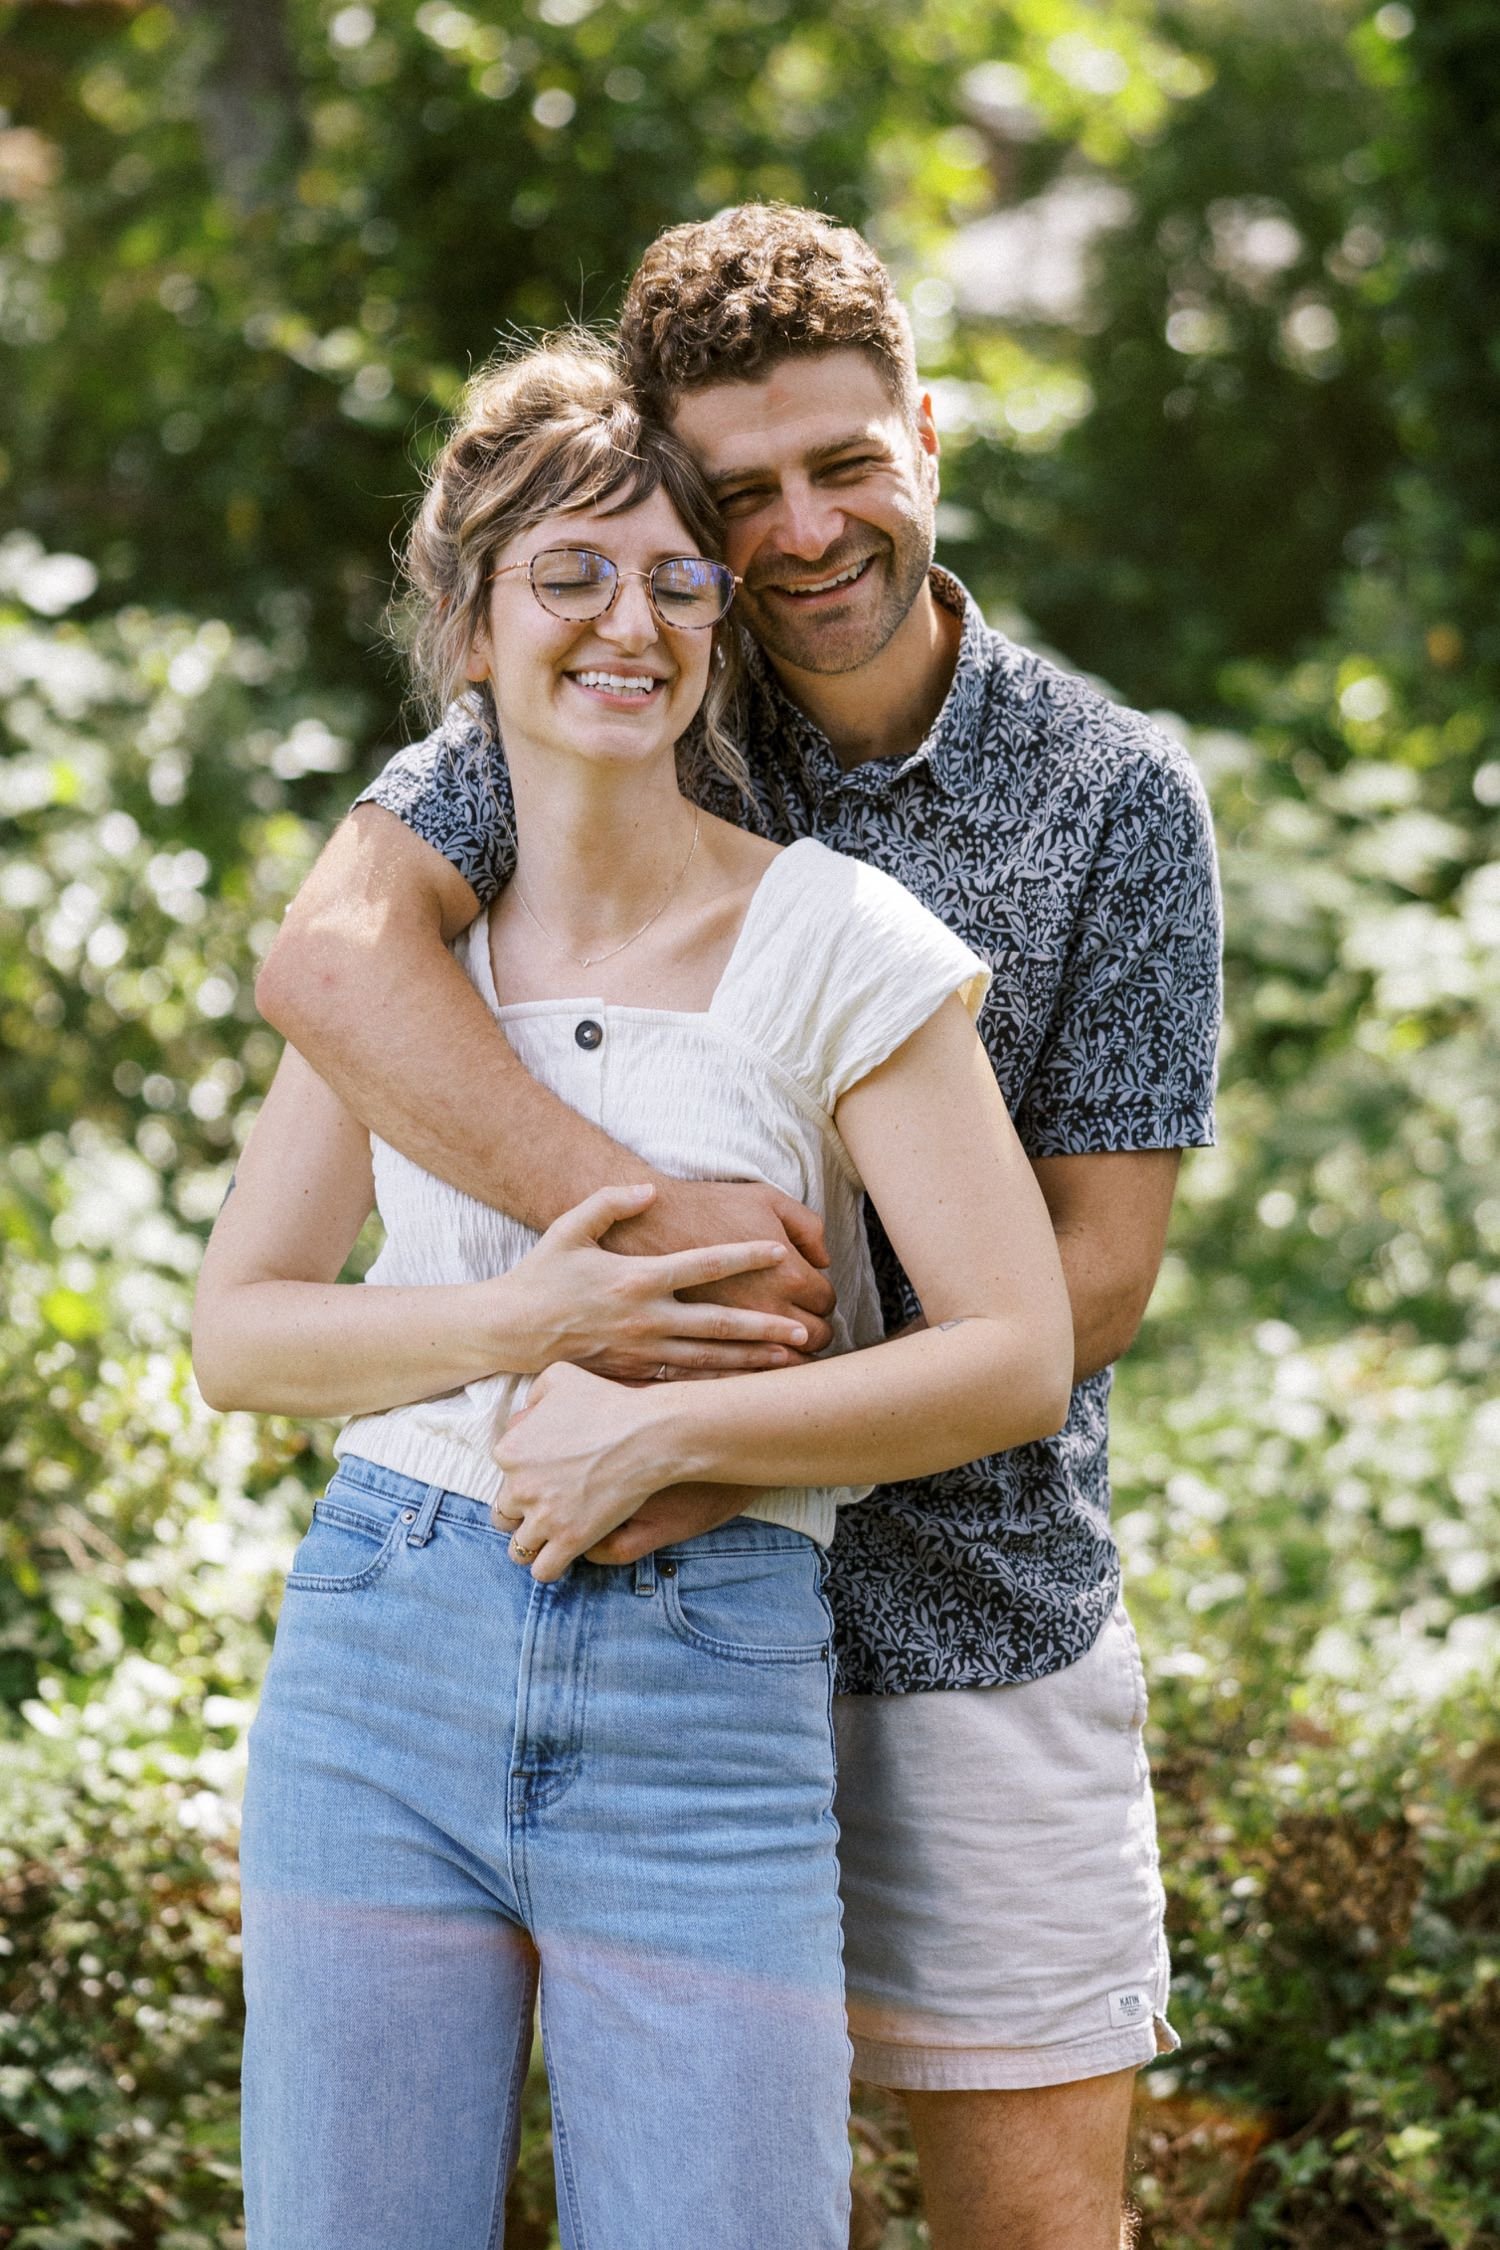 24_Portland Family Photographer-7949_man and woman hug each other while surrounded by greenery in backyard.jpg